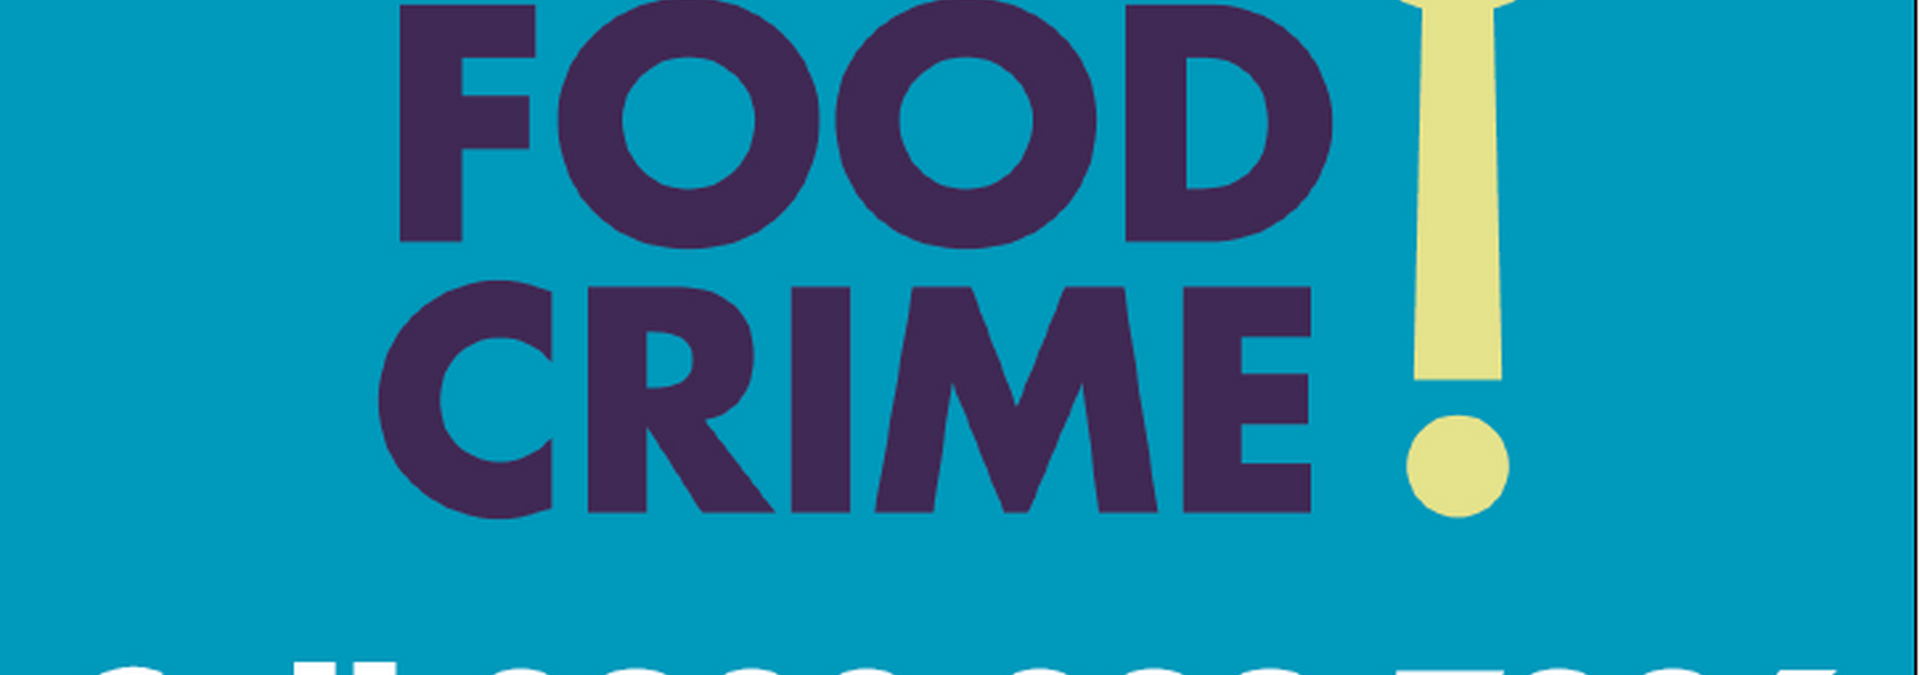 Report food crime concerns anonymously using the dedicated helpline